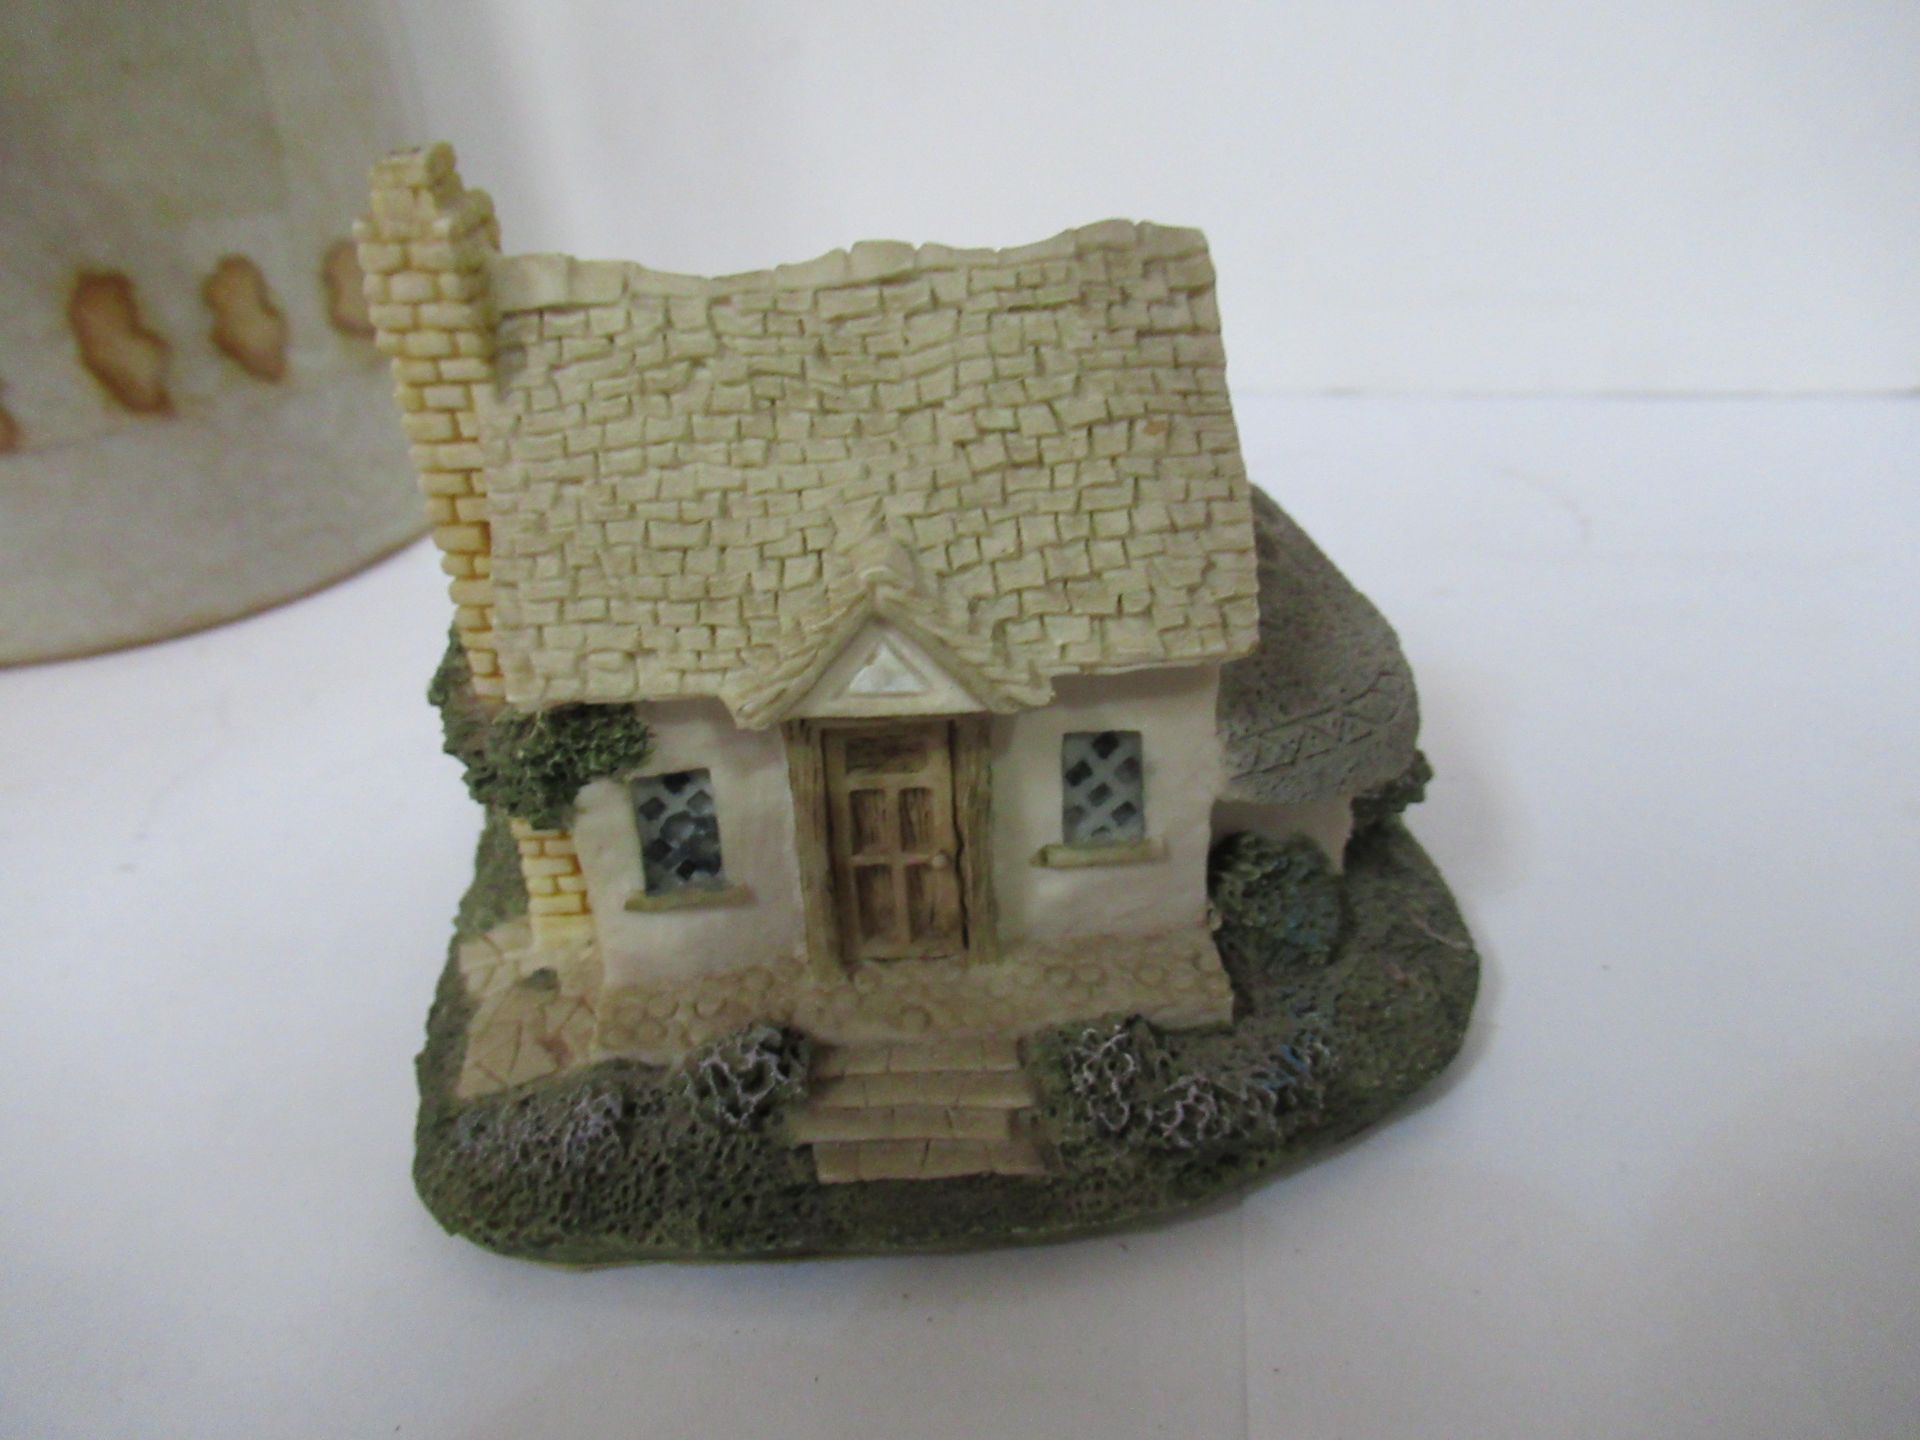 Nativity scene, 4x model houses and tall figure of Santa - Image 8 of 11